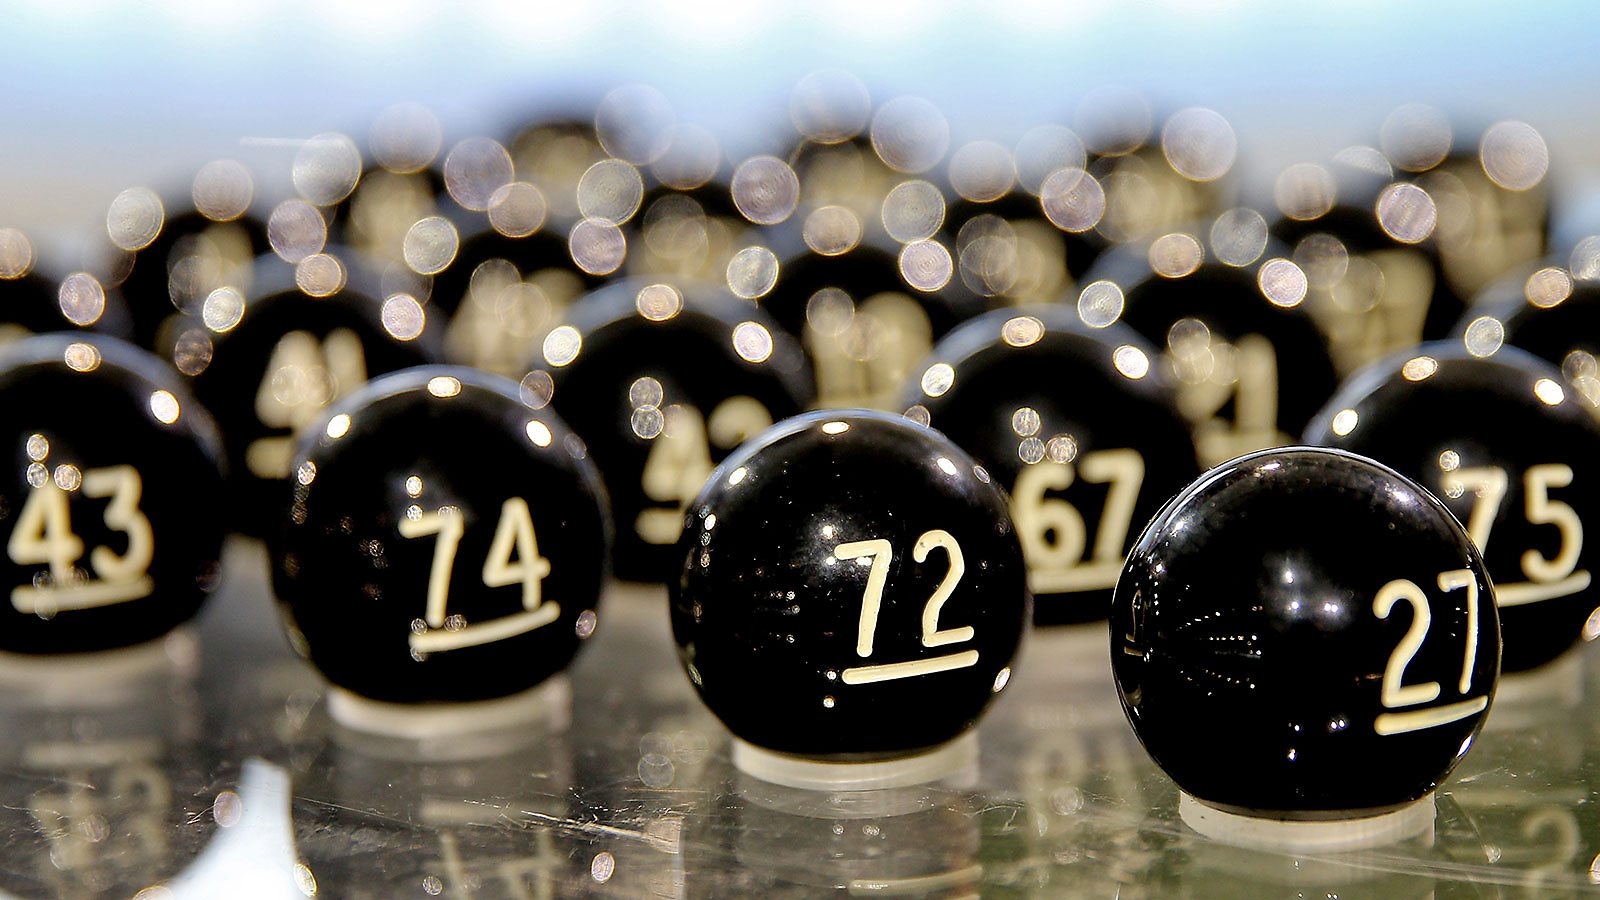 how one man used a maths trick to win the lottery, but that same trick can't be repeated